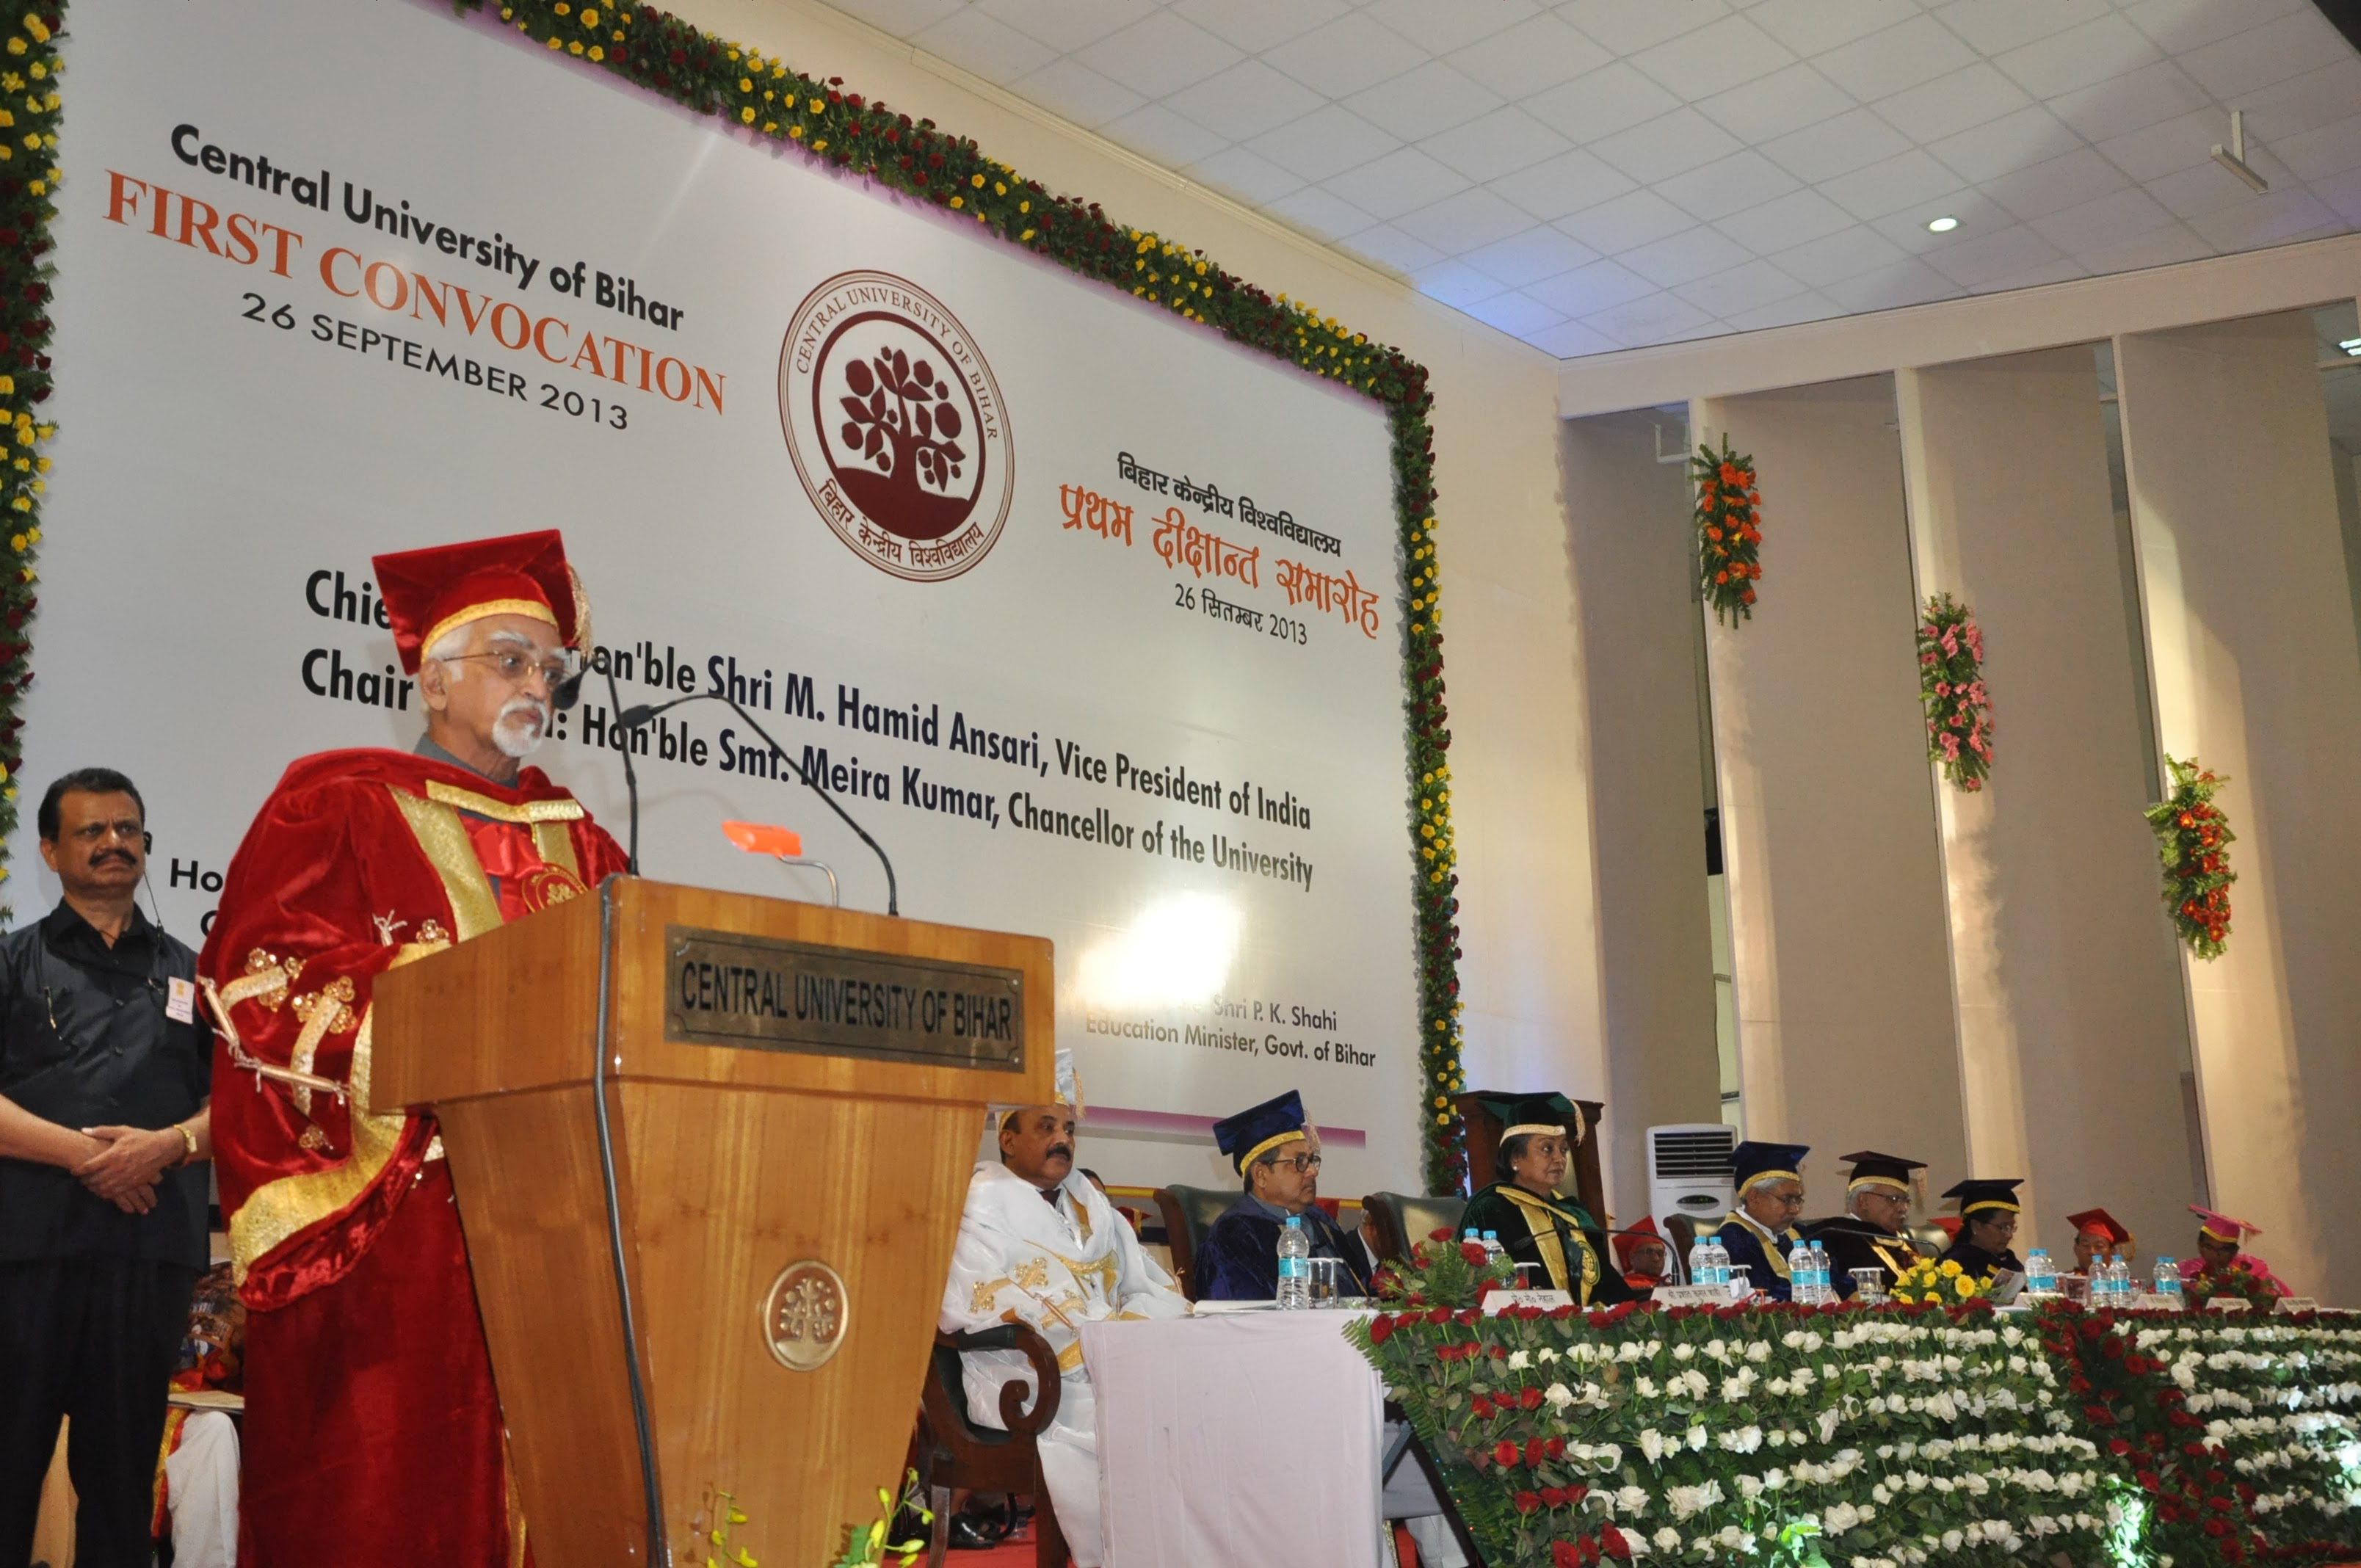 Hon'ble Vice President addressing during the Convocation